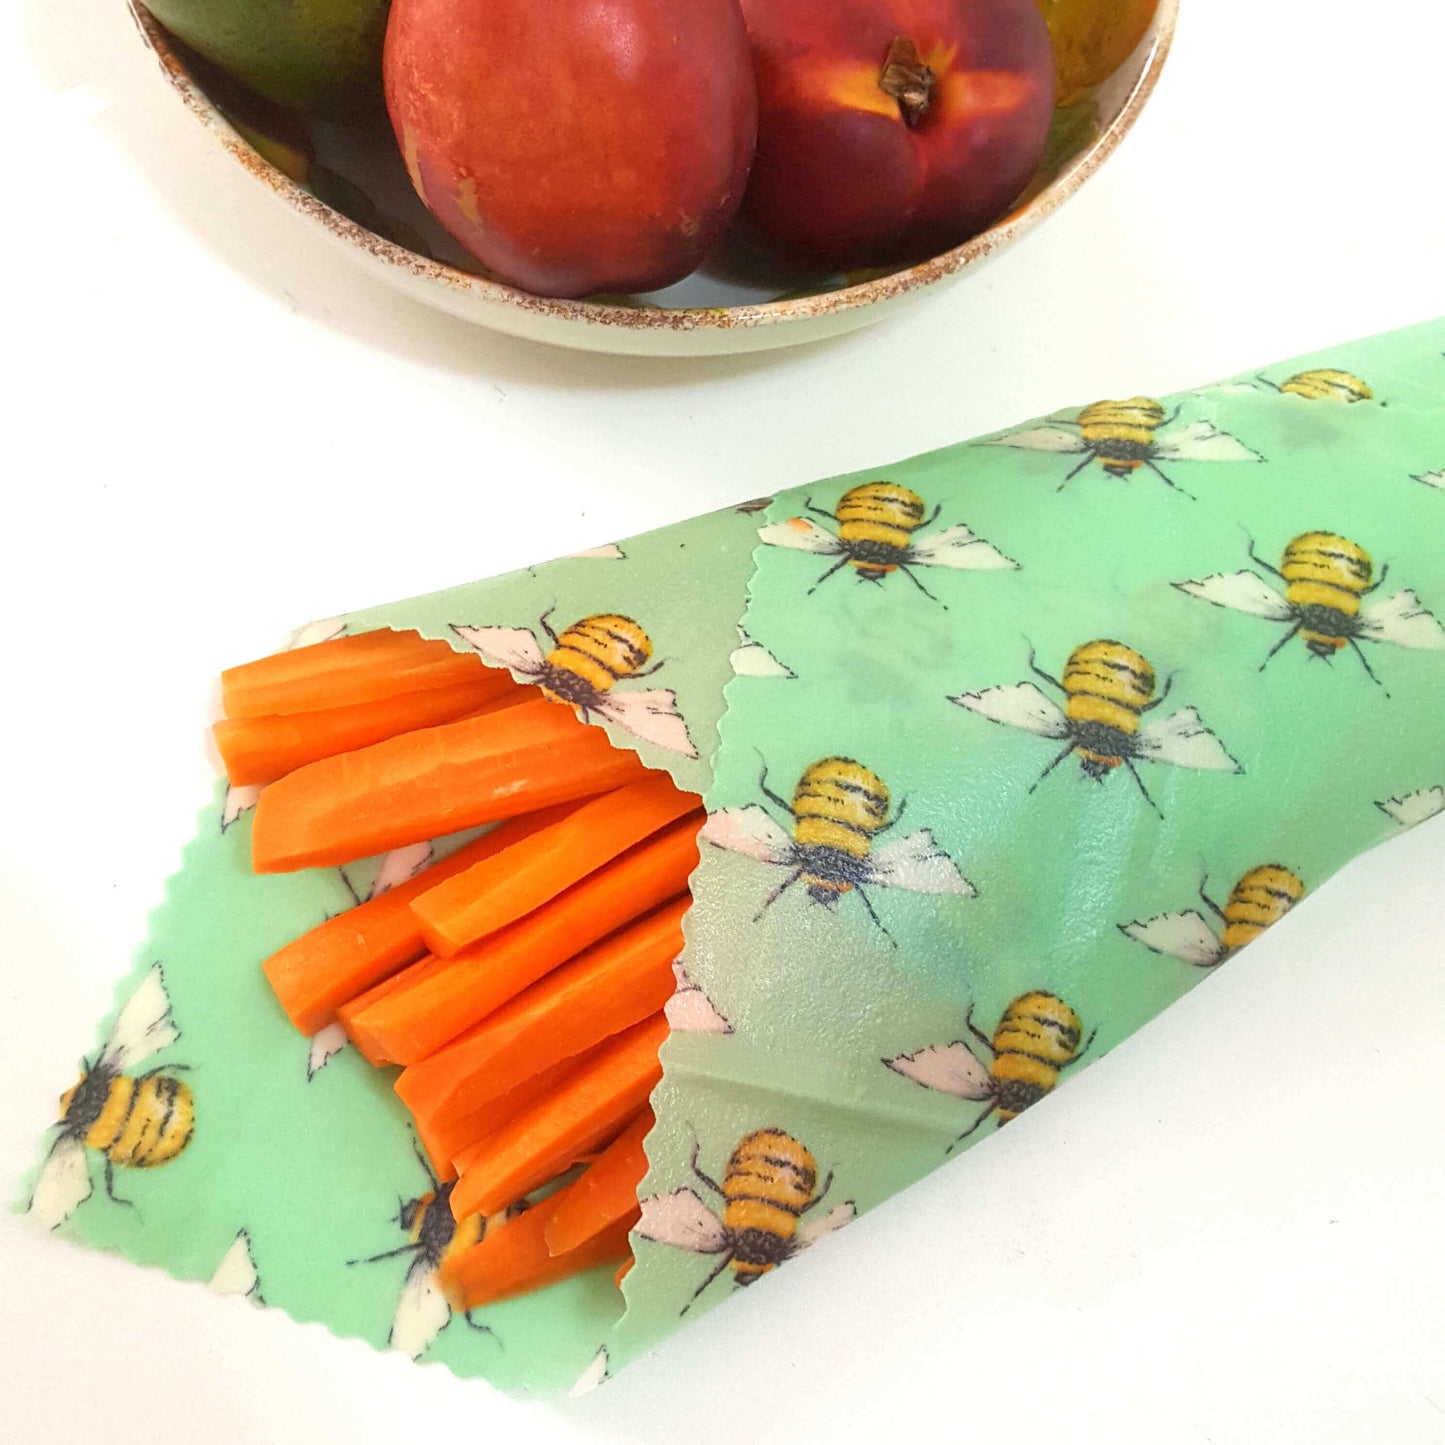 Reusable Beeswax Food Wraps 100% Hand Made in the UK by Honey Bee Good. Planet-Kind single large beeswax wrap in Green Bees pattern as flatlay with carrots